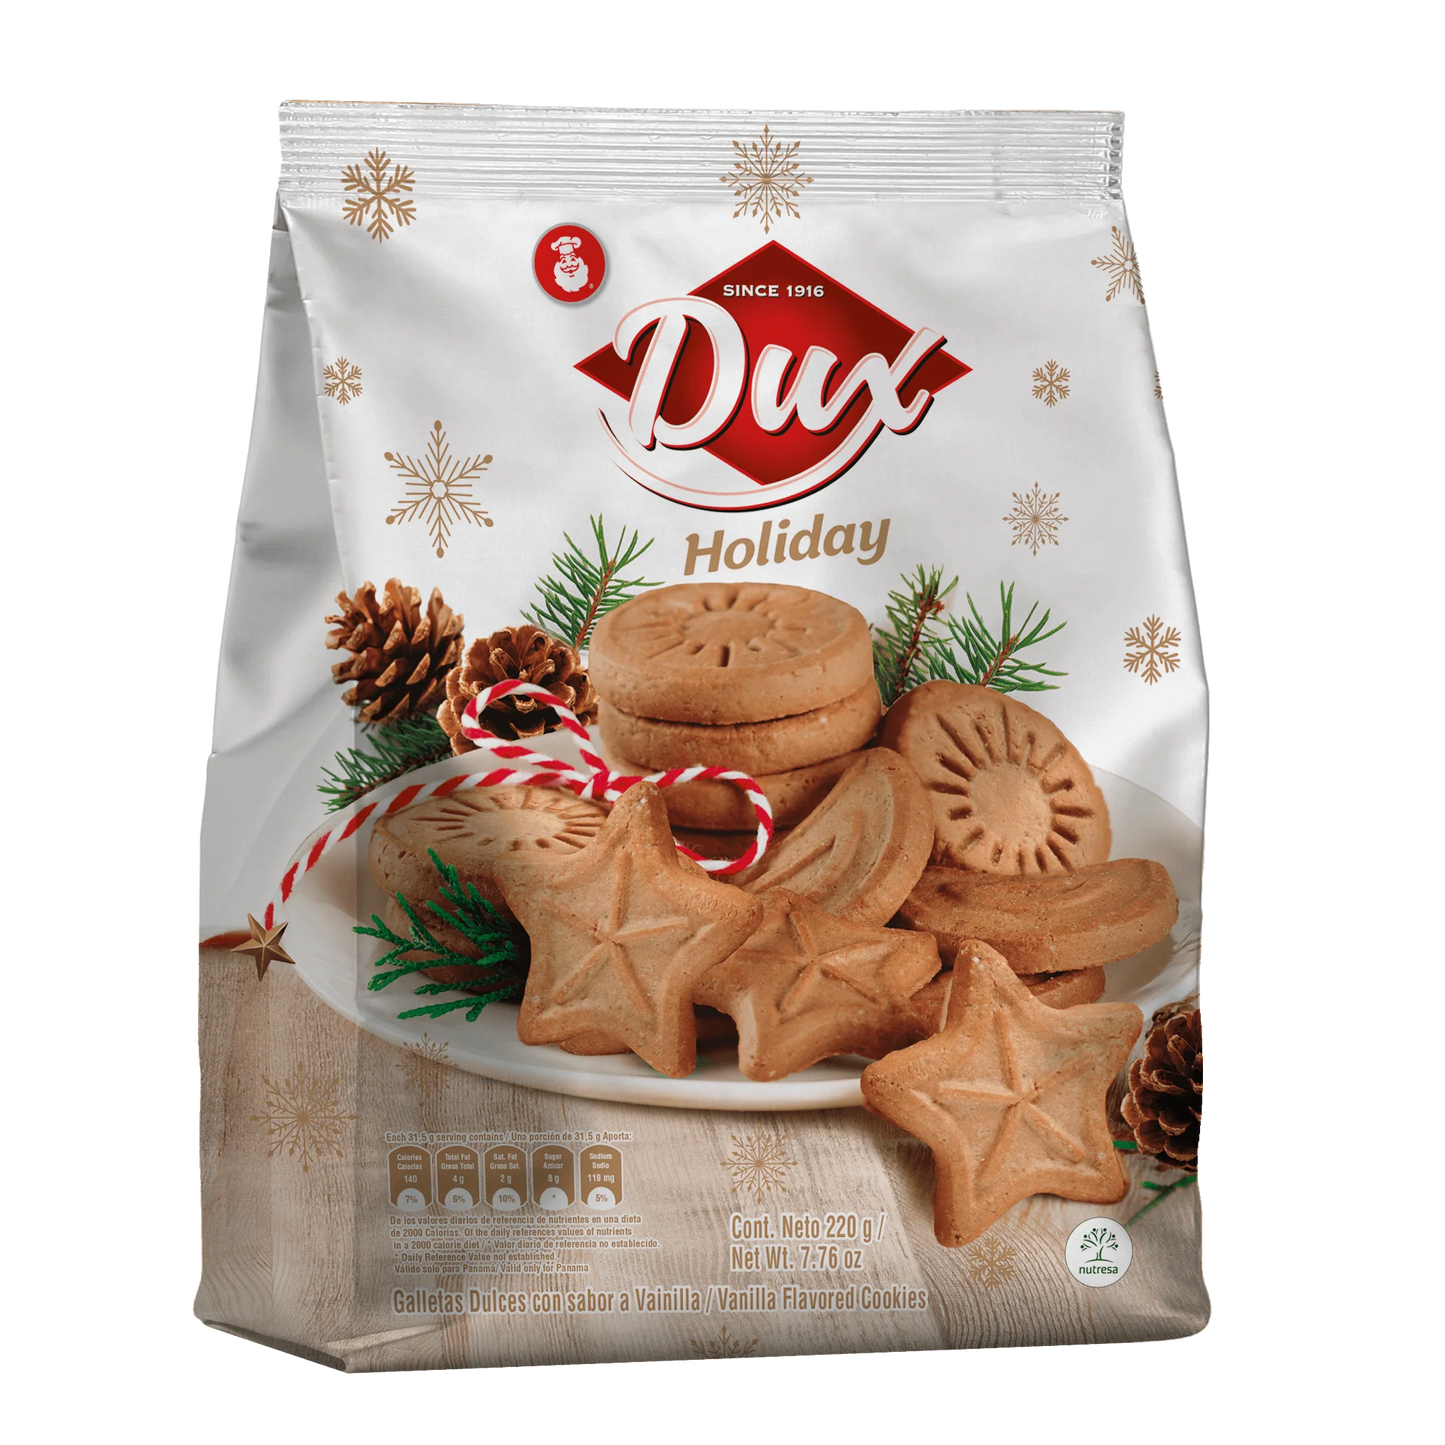 DUX HOLIDAY COOKIES - HAPPY HOLIDAYS FROM KARE KRATE!